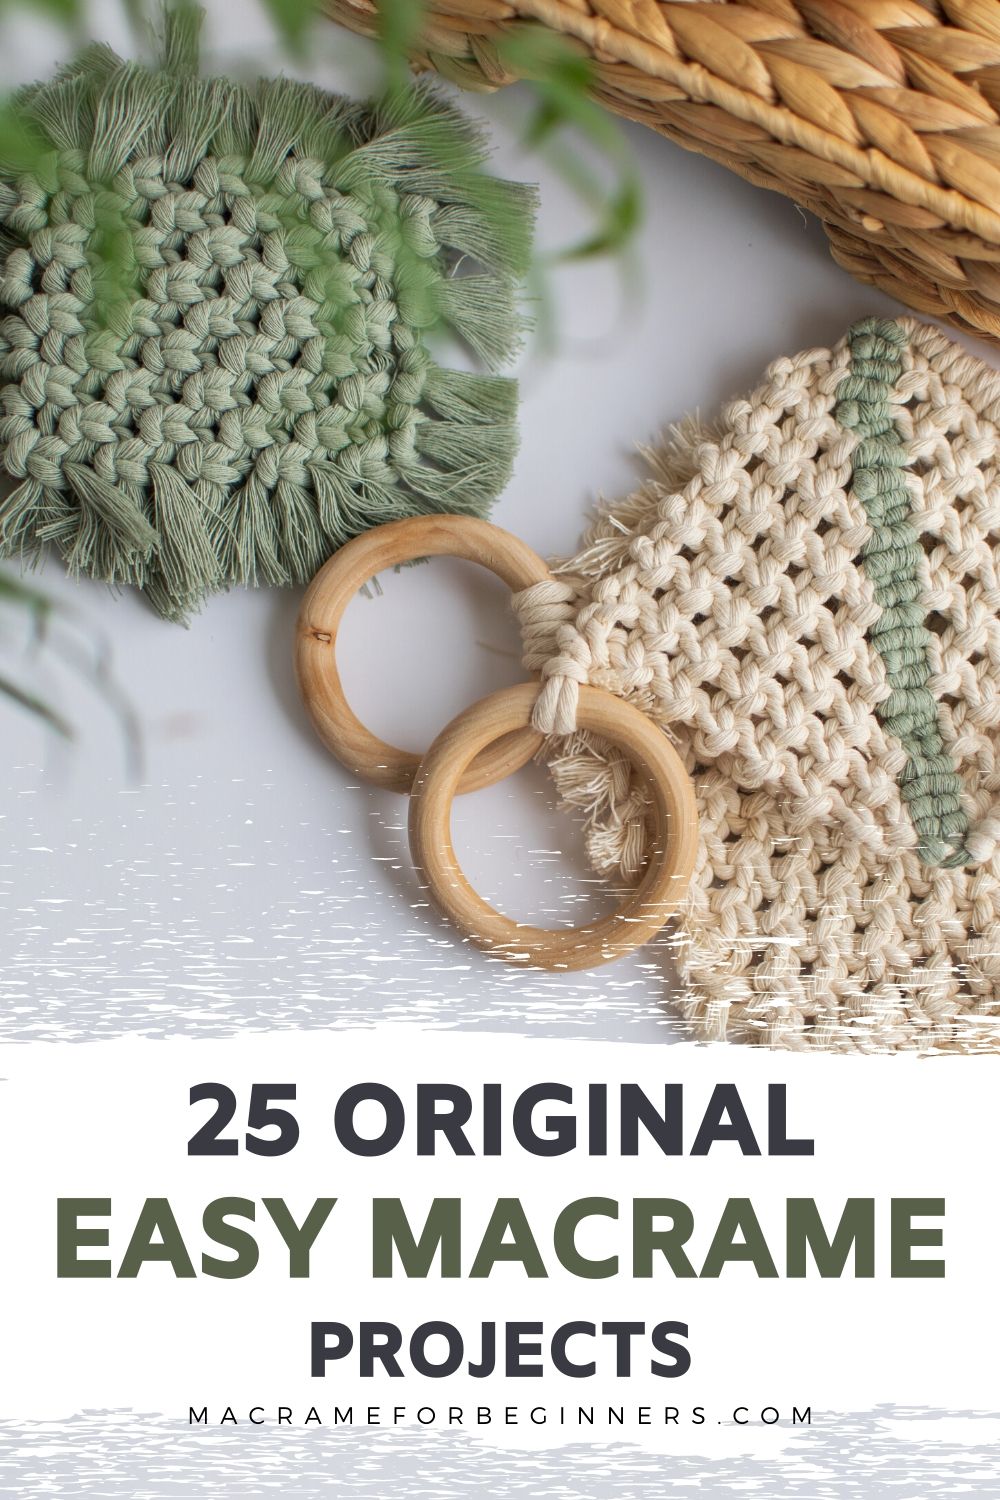 25 Original Ideas for Your Next Macrame Project - Macrame for Beginners